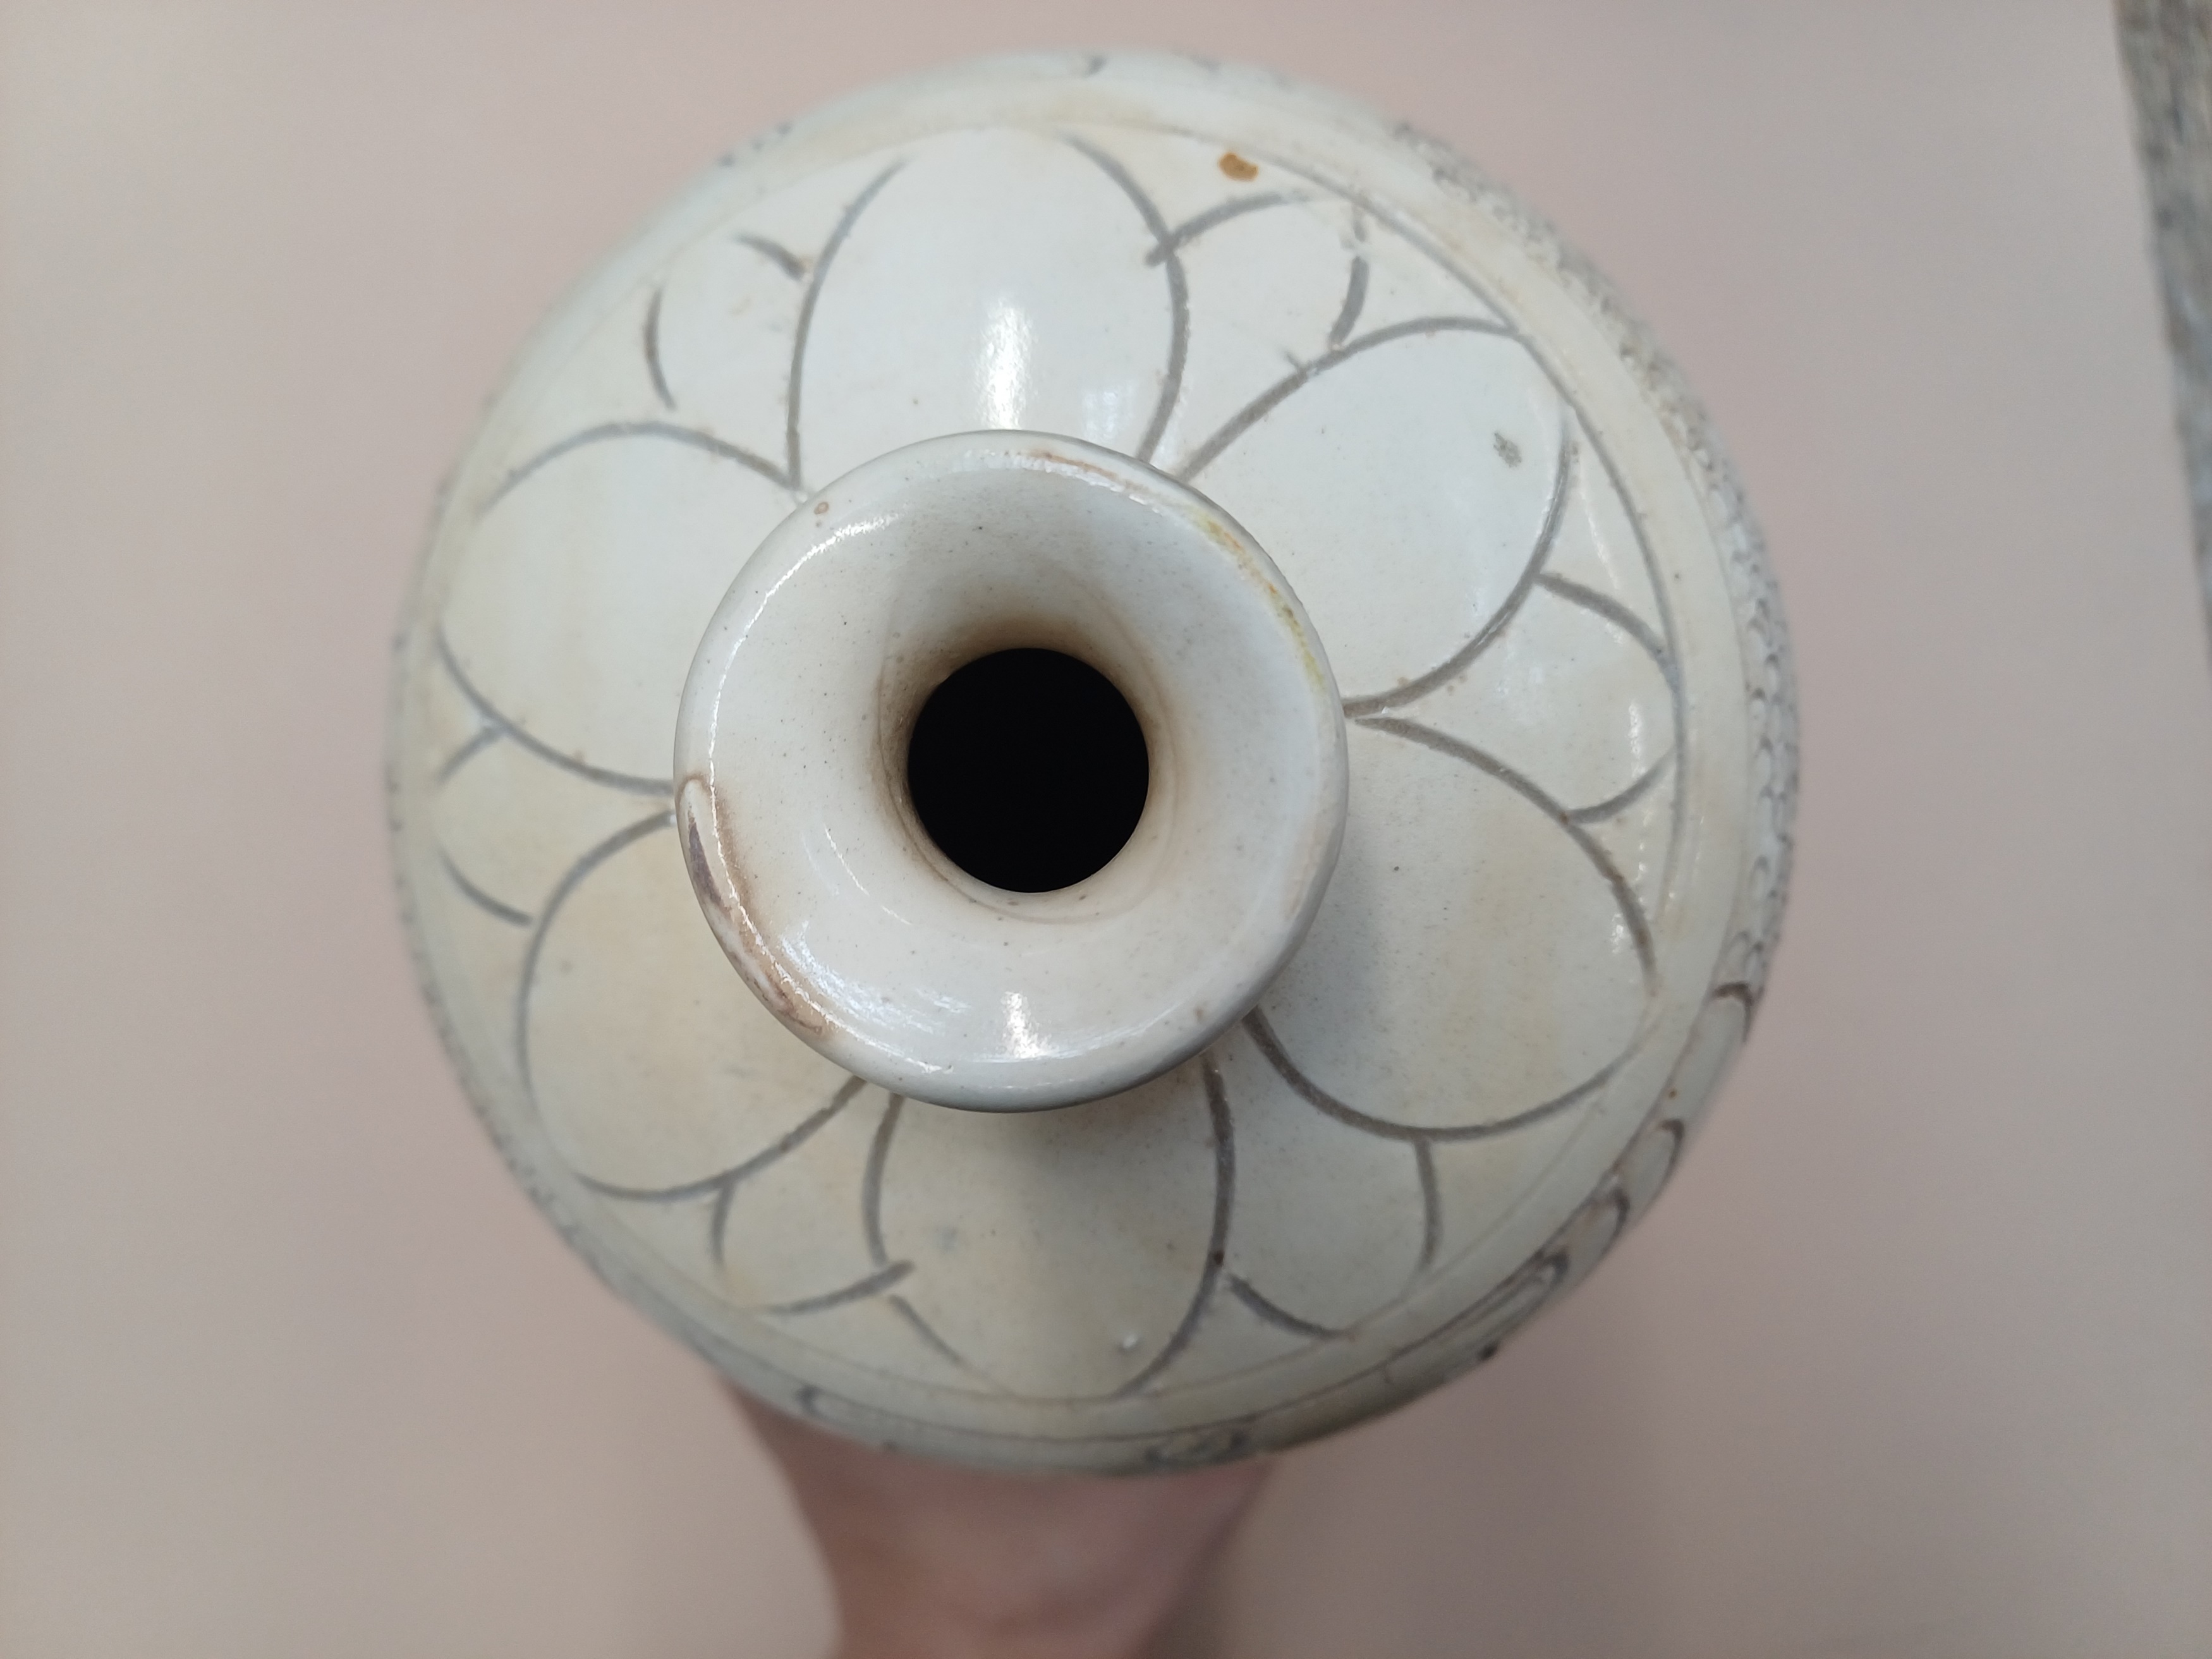 A CHINESE CIZHOU-STYLE INCISED VASE 二十世紀 仿磁州窰白釉劃花梅瓶 - Image 4 of 9